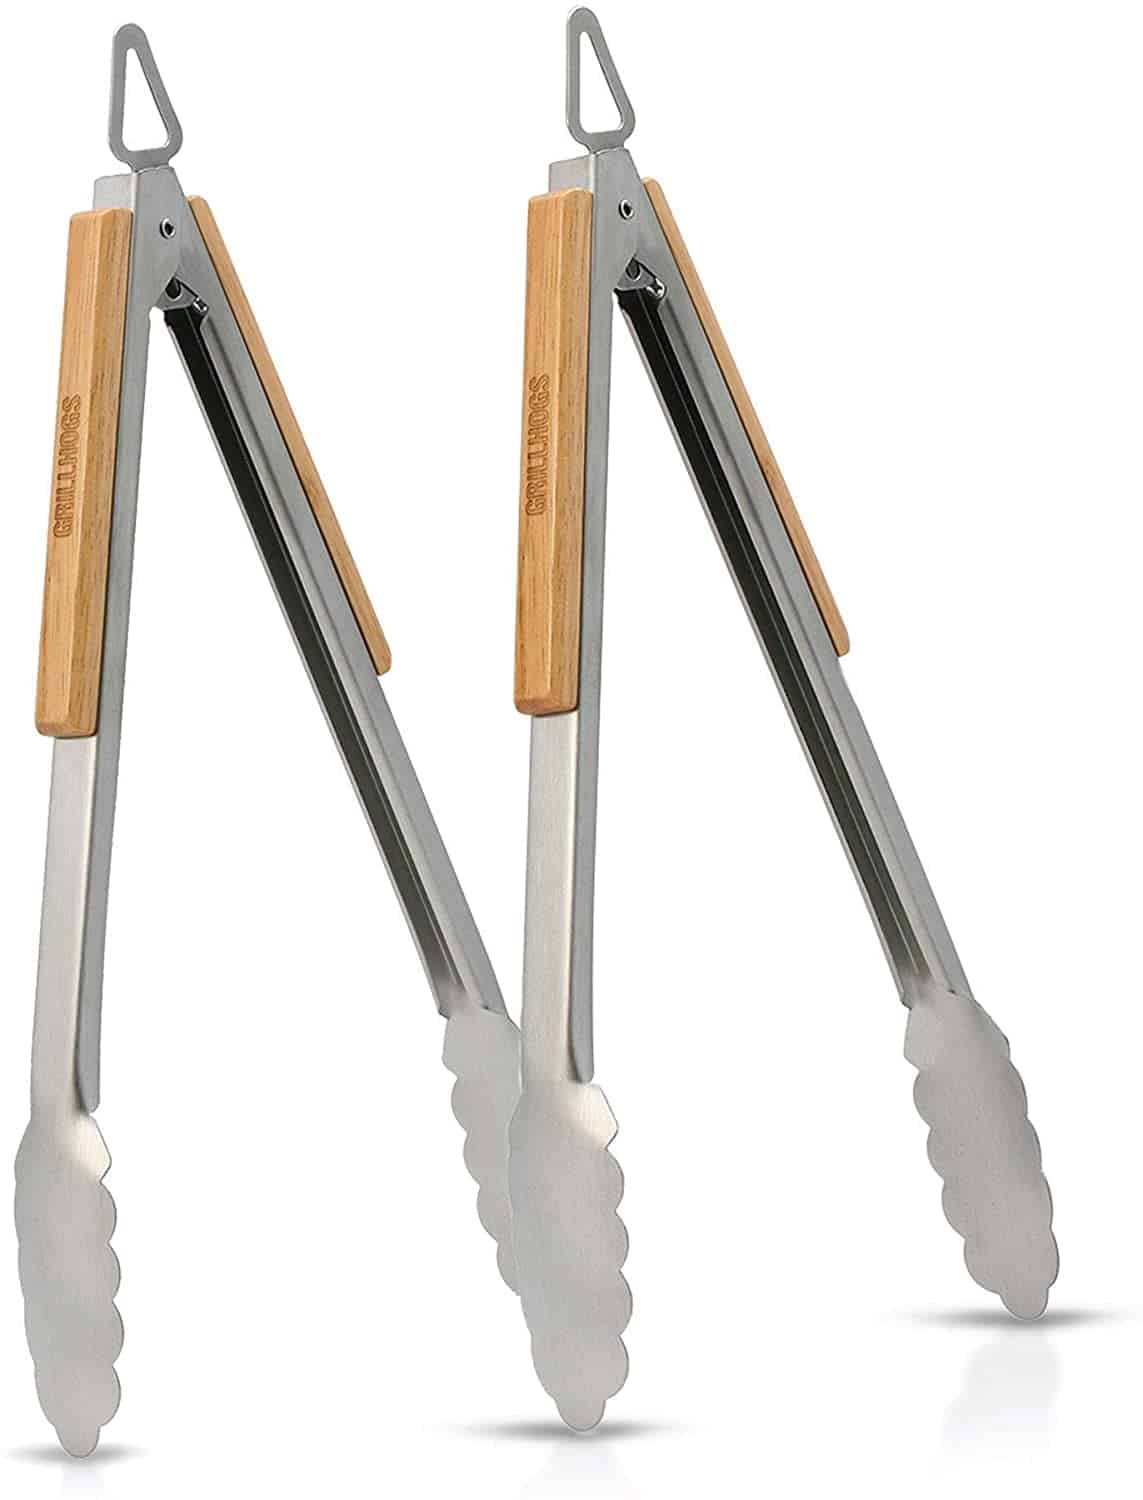 Best grill tongs with wooden handle- GRILLHOGS 12-Inch 2 Pack